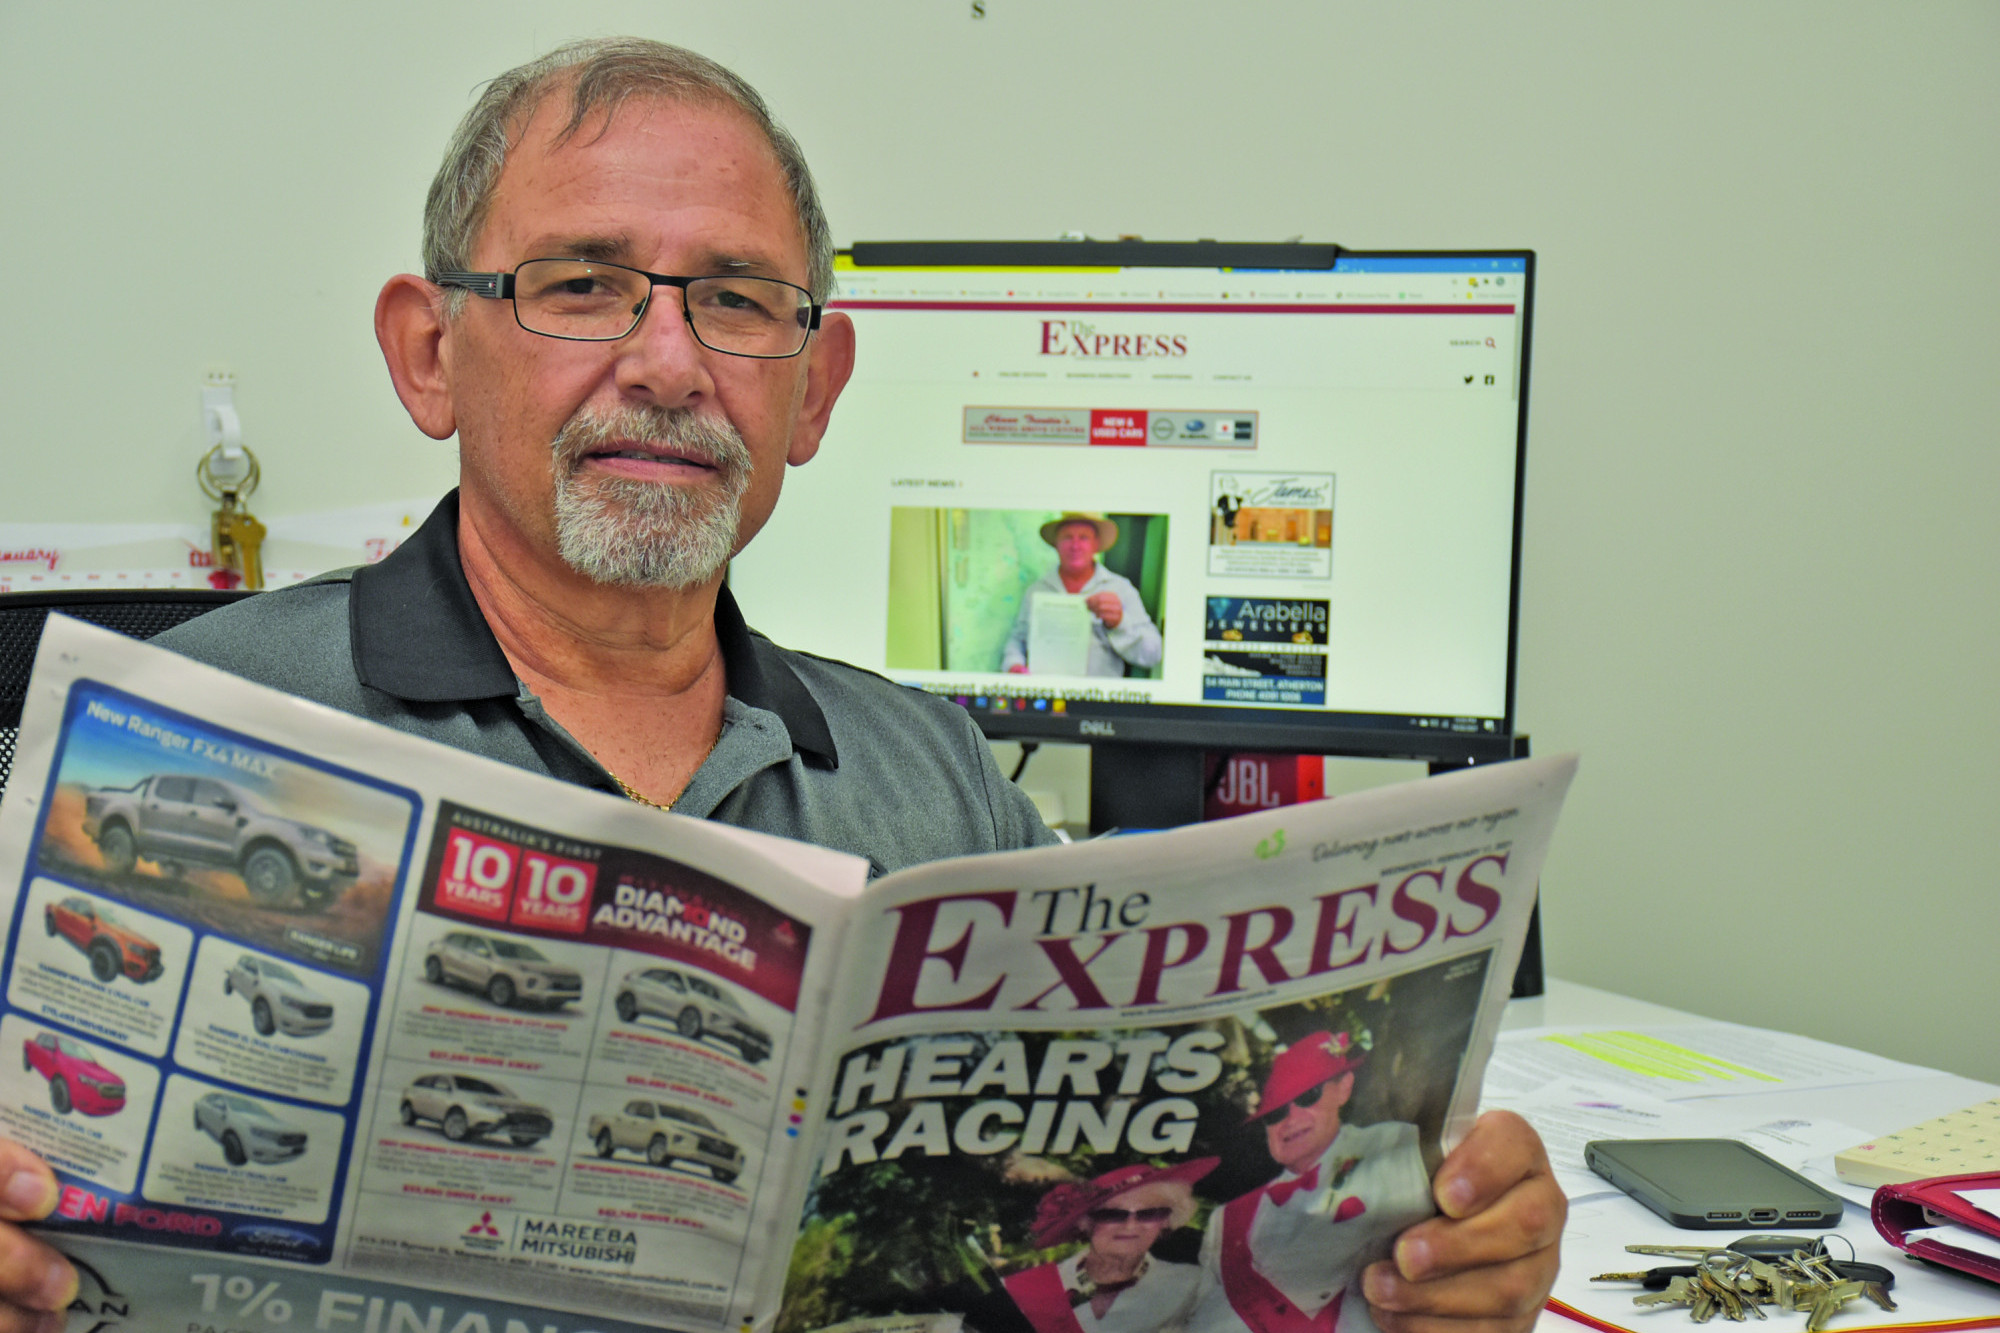 Express Newspaper Editor and Owner Carl Portella who said the Facebook ban won’t stop him distributing free community news.